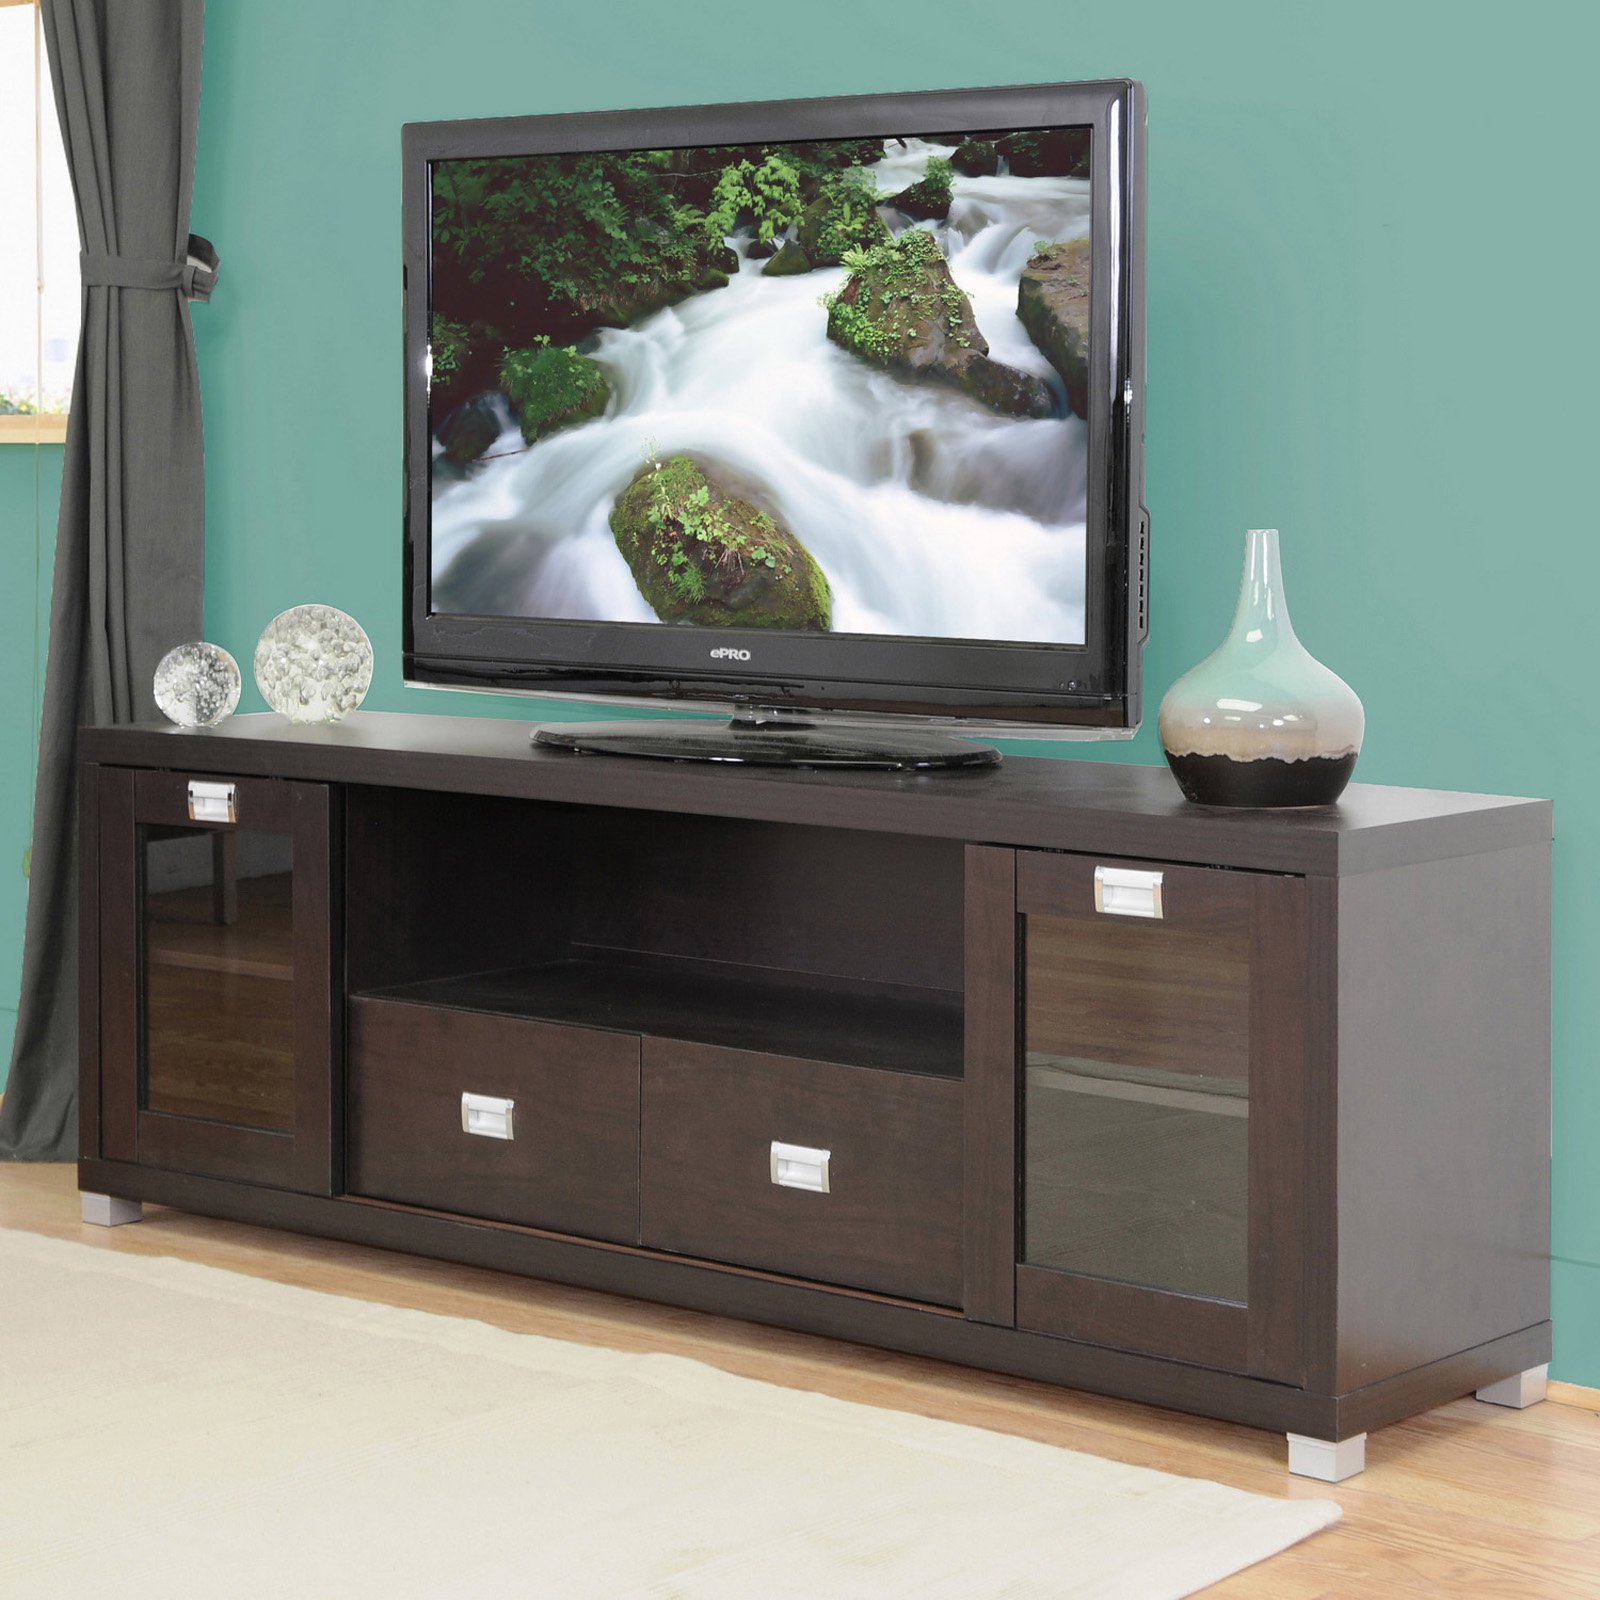 Baxton Studio Gosford TV Stand in Brown - image 1 of 3